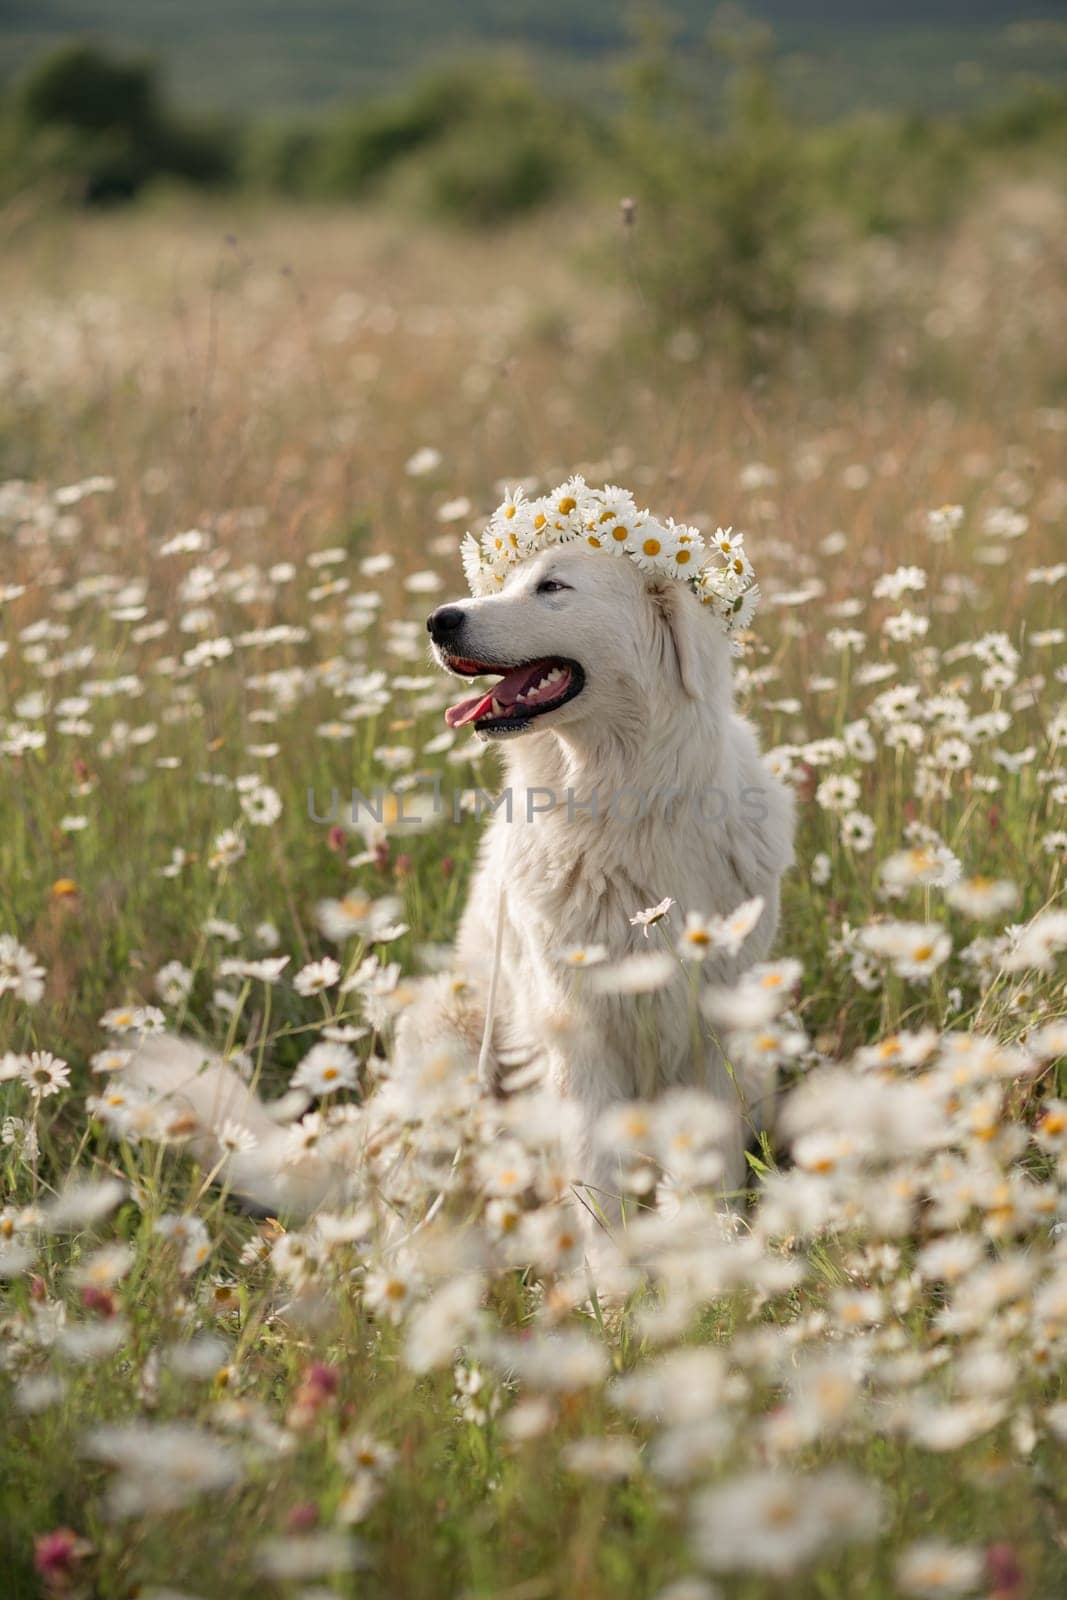 Daisies white dog Maremma Sheepdog in a wreath of daisies sits on a green lawn with wild flowers daisies, walks a pet. Cute photo with a dog in a wreath of daisies. by Matiunina